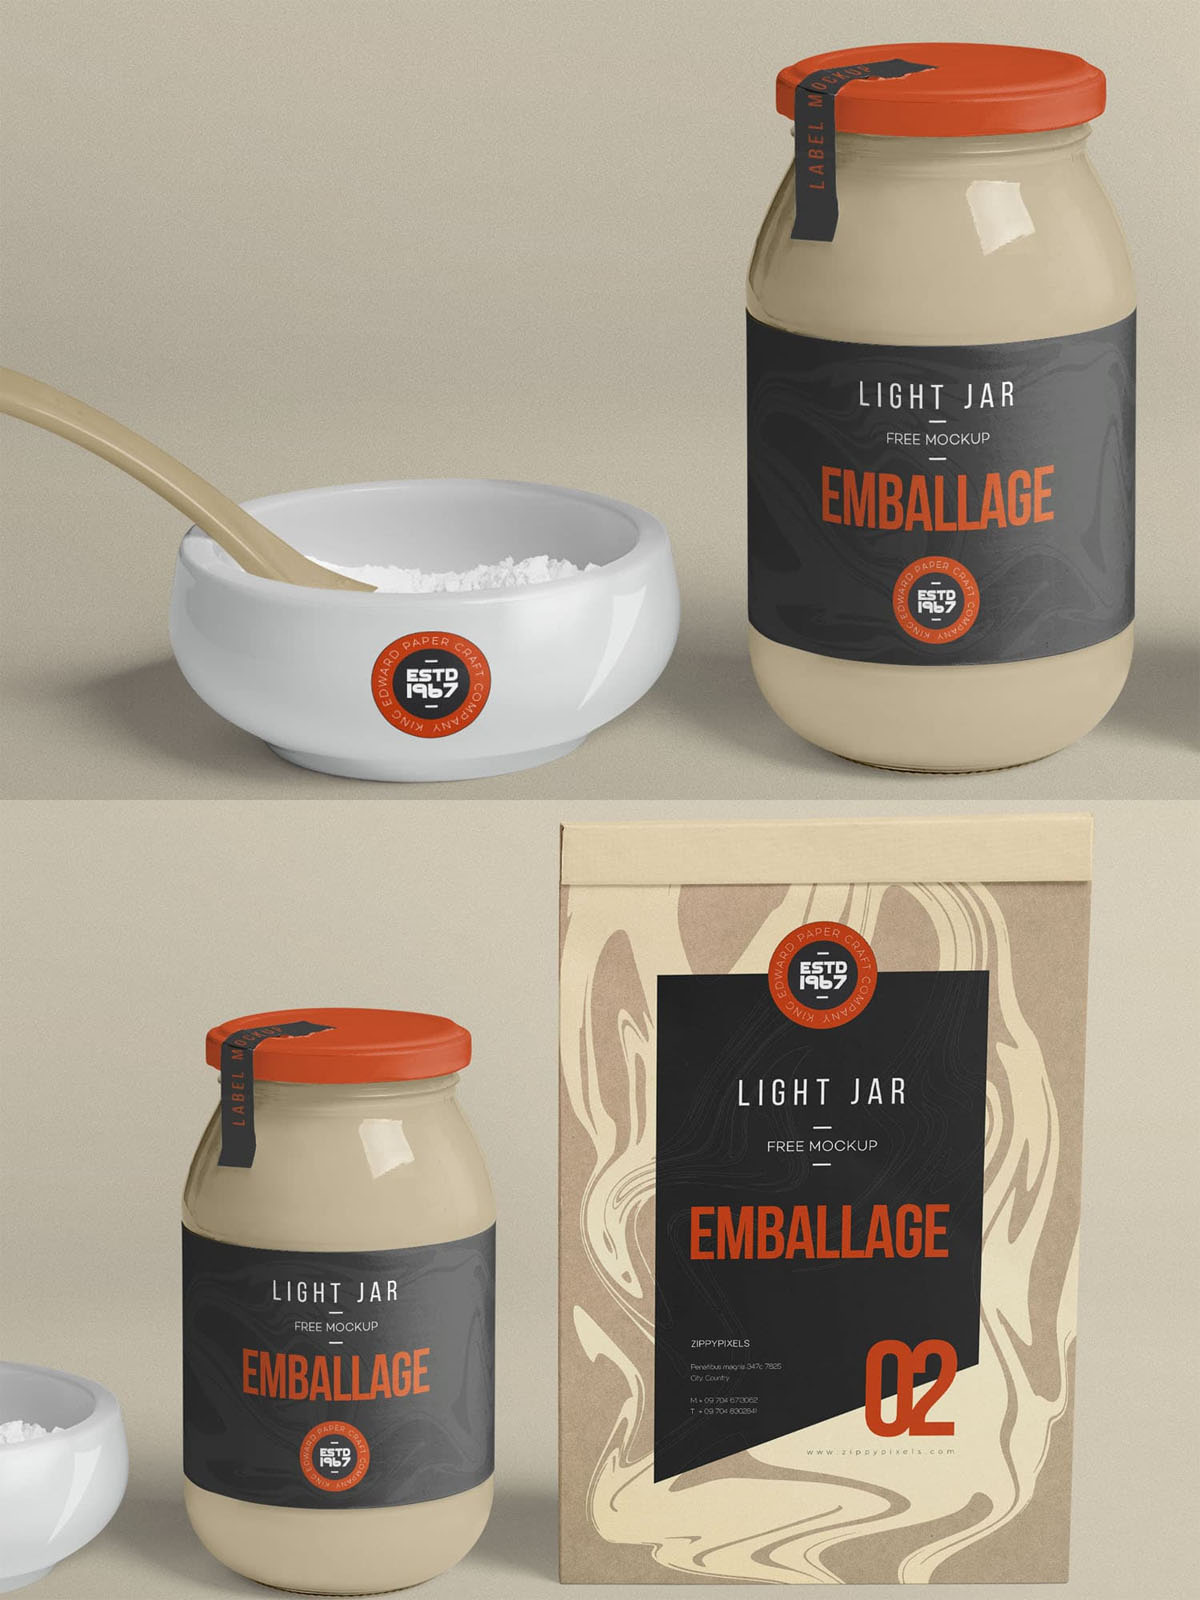 free jar mockup is ideal for displaying a corporate brand or logo on the label.